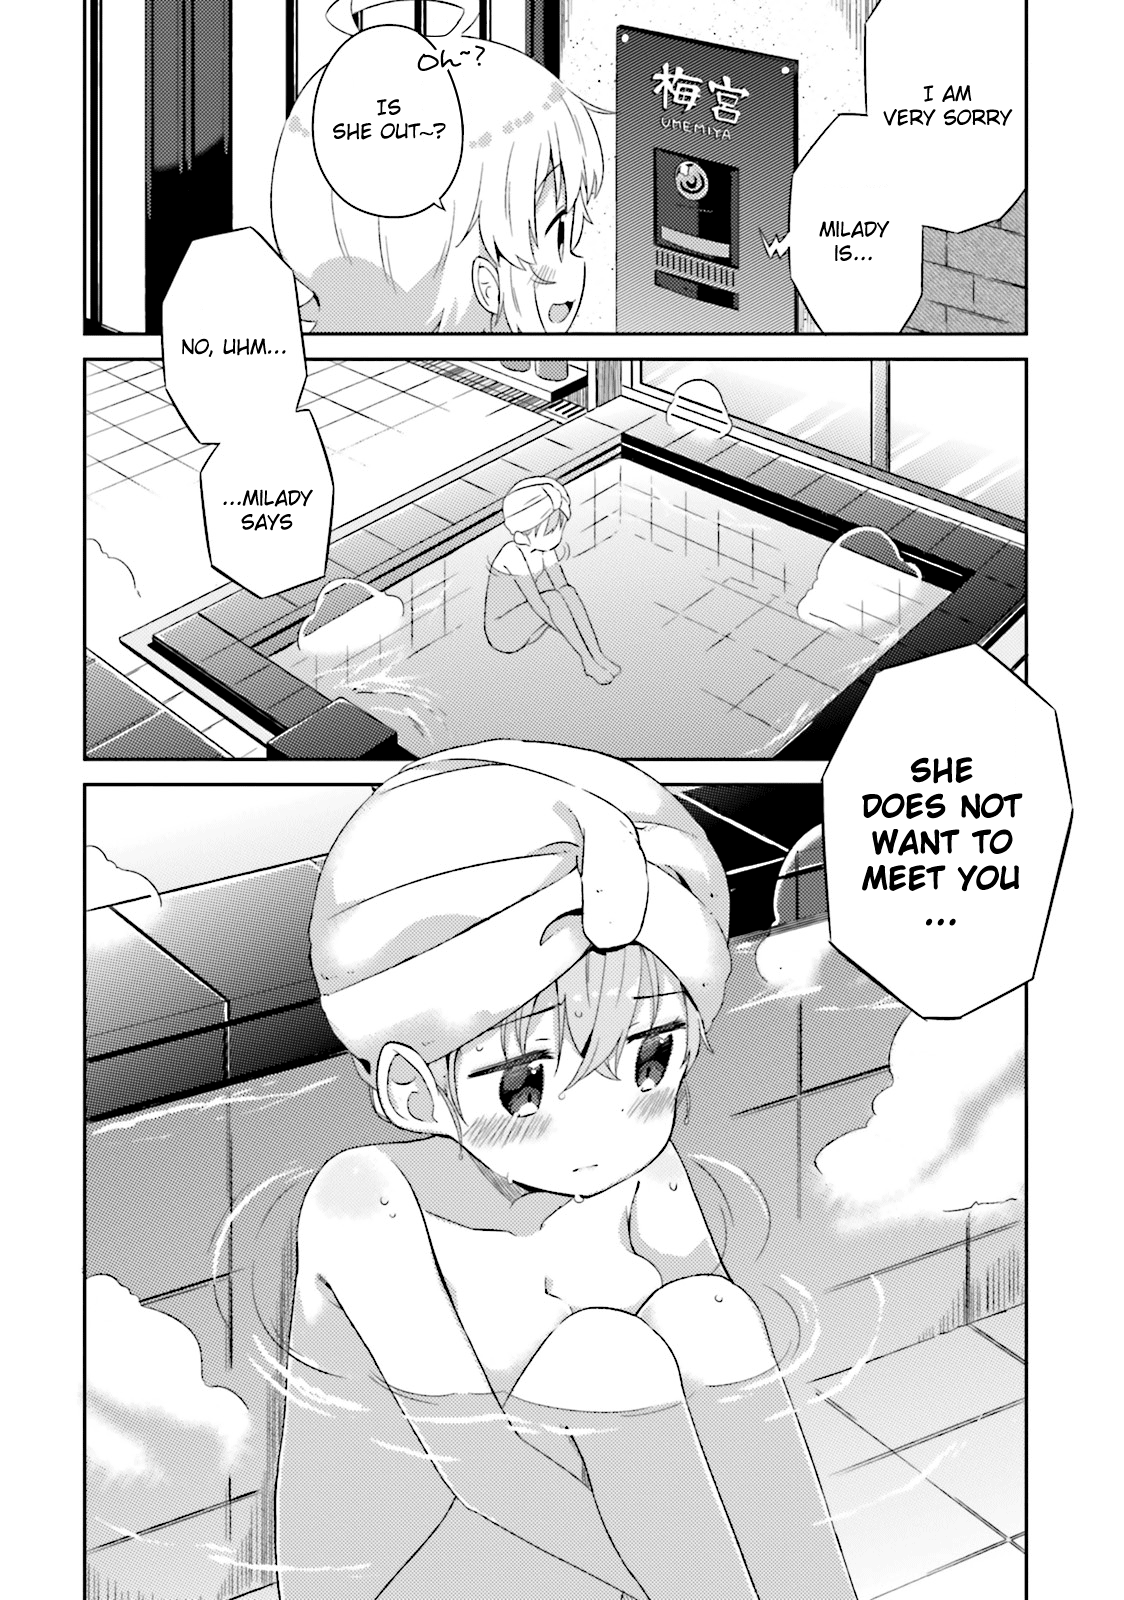 She Gets Girls Every Day. - Page 2